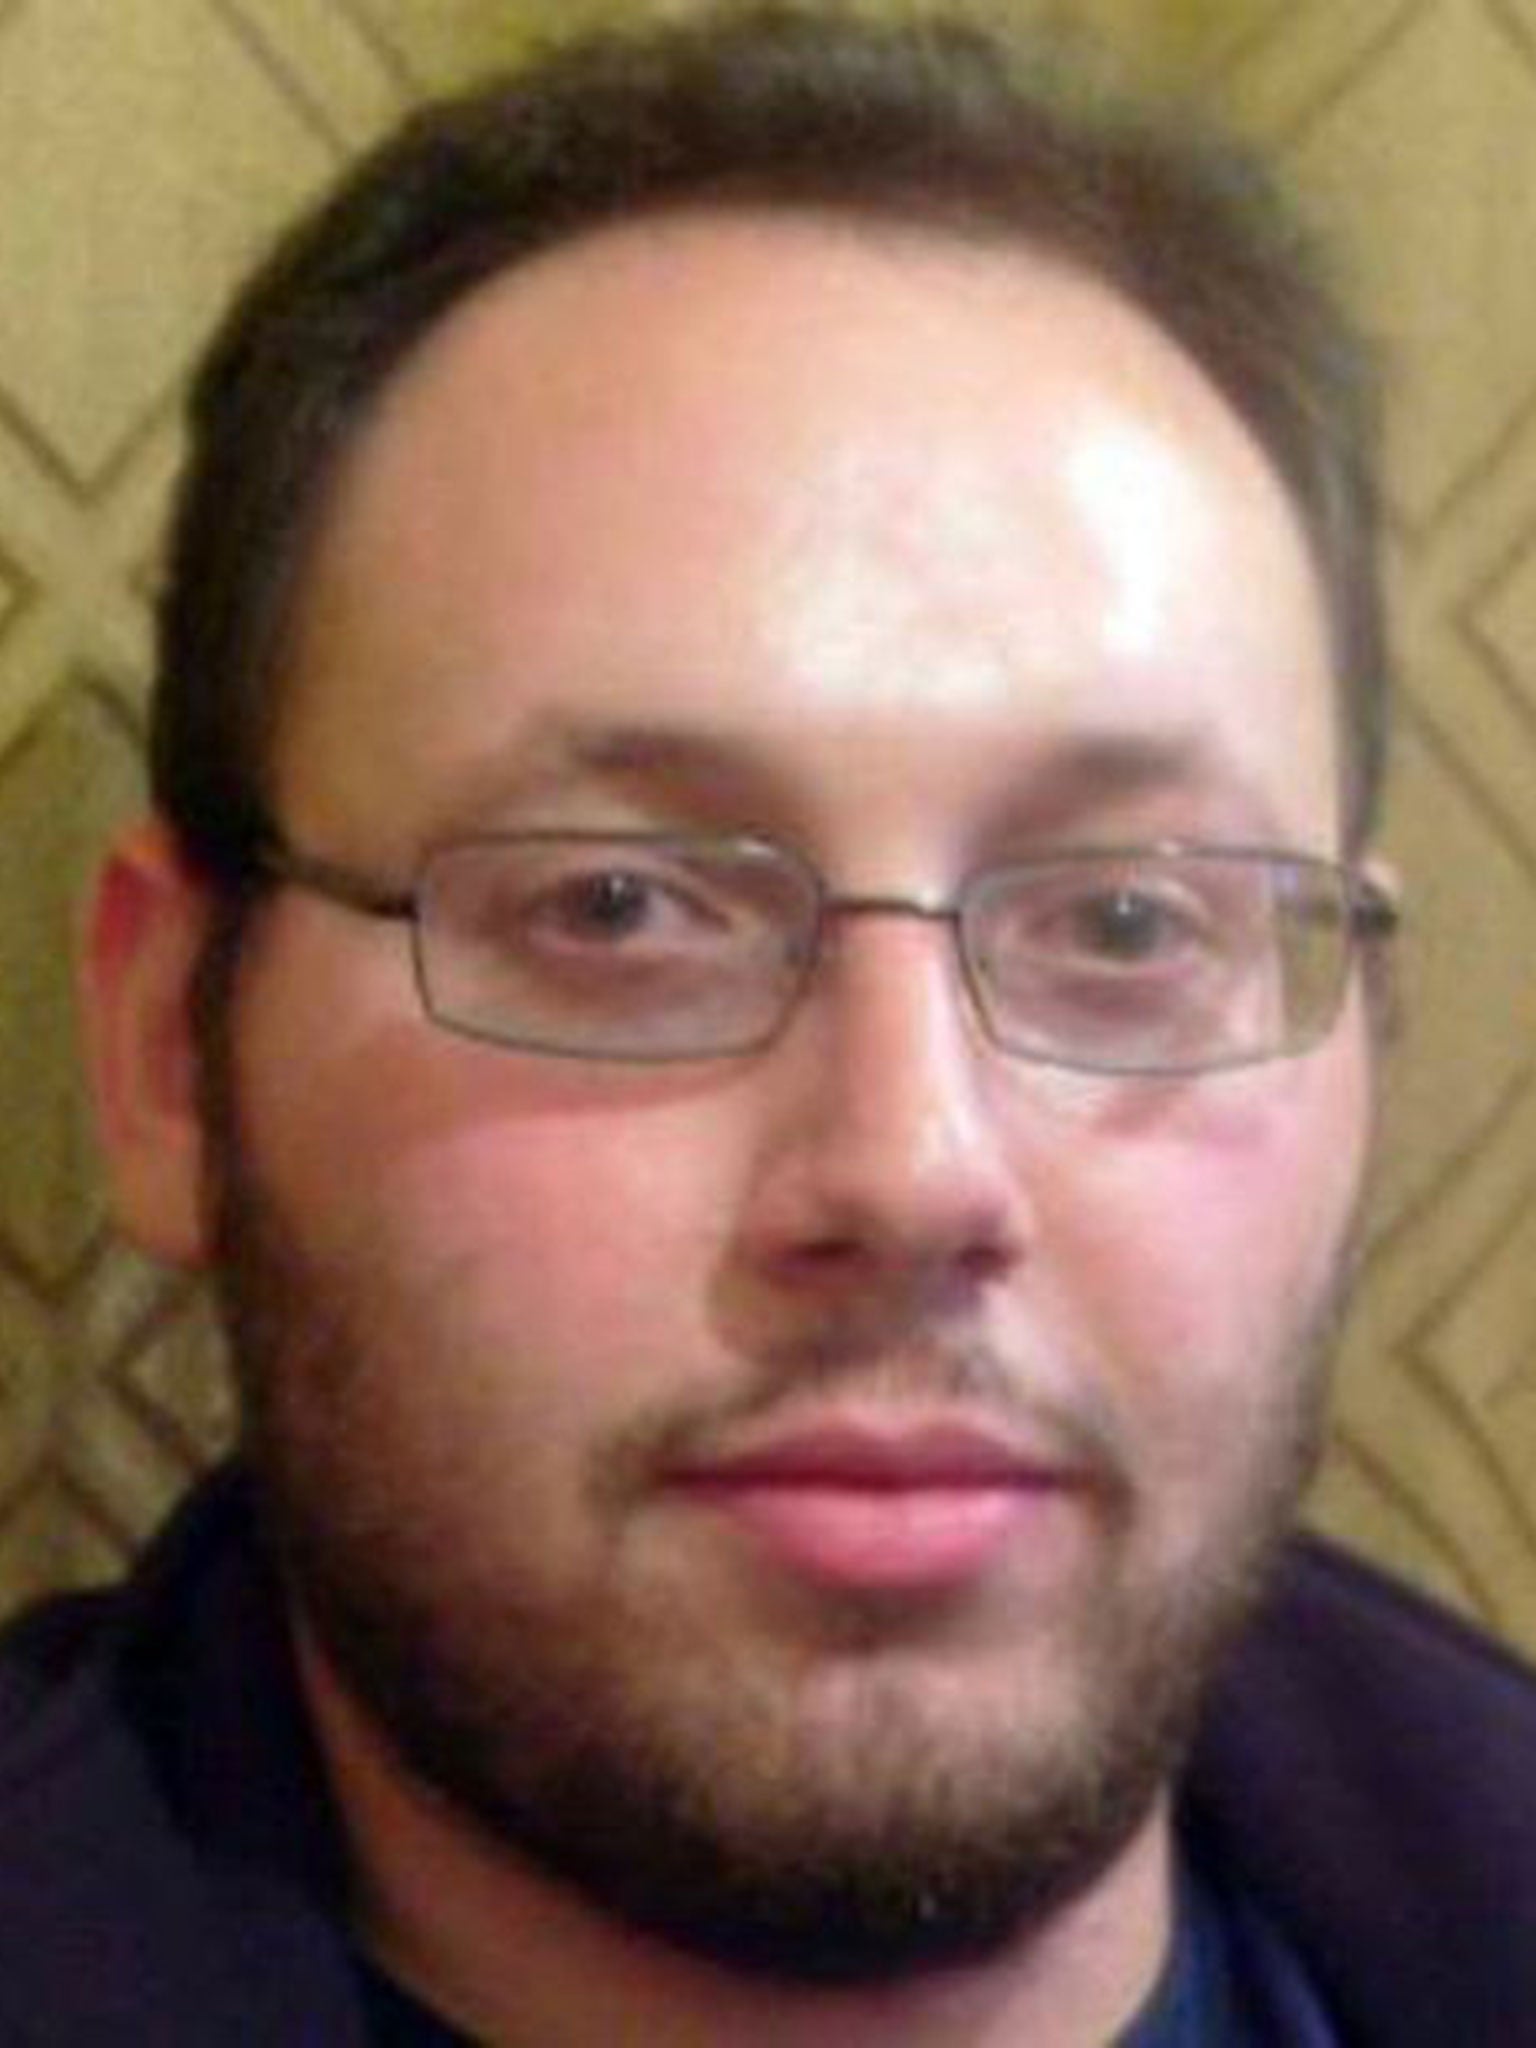 Steven Sotloff, a US journalist, is also held by Isis